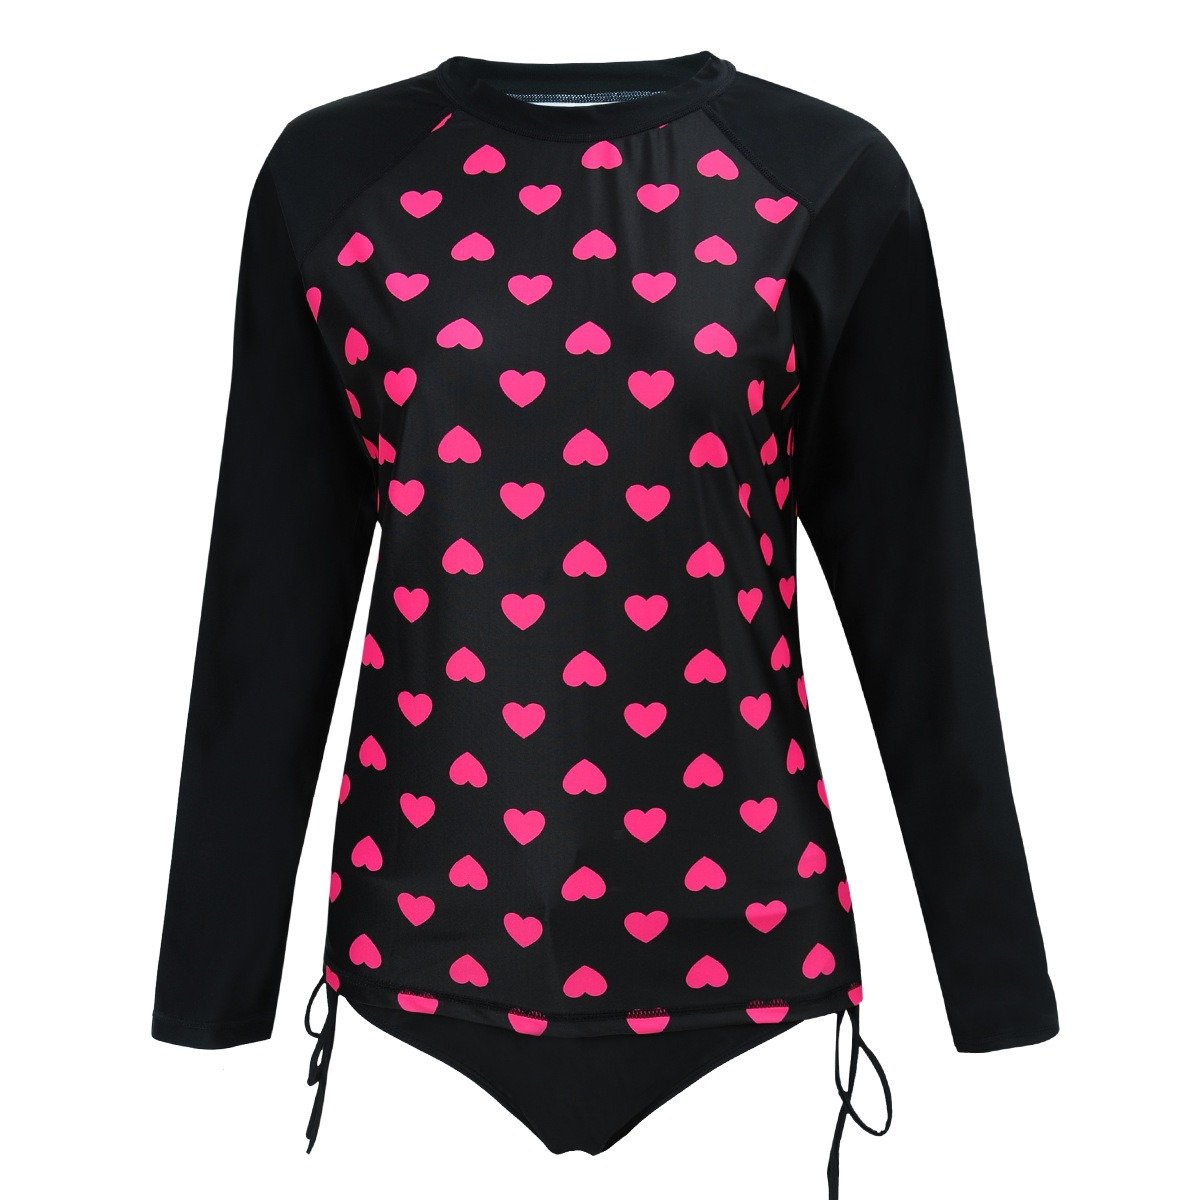 Long Sleeves Swimsuit Heart Printed Surf Suit D7732